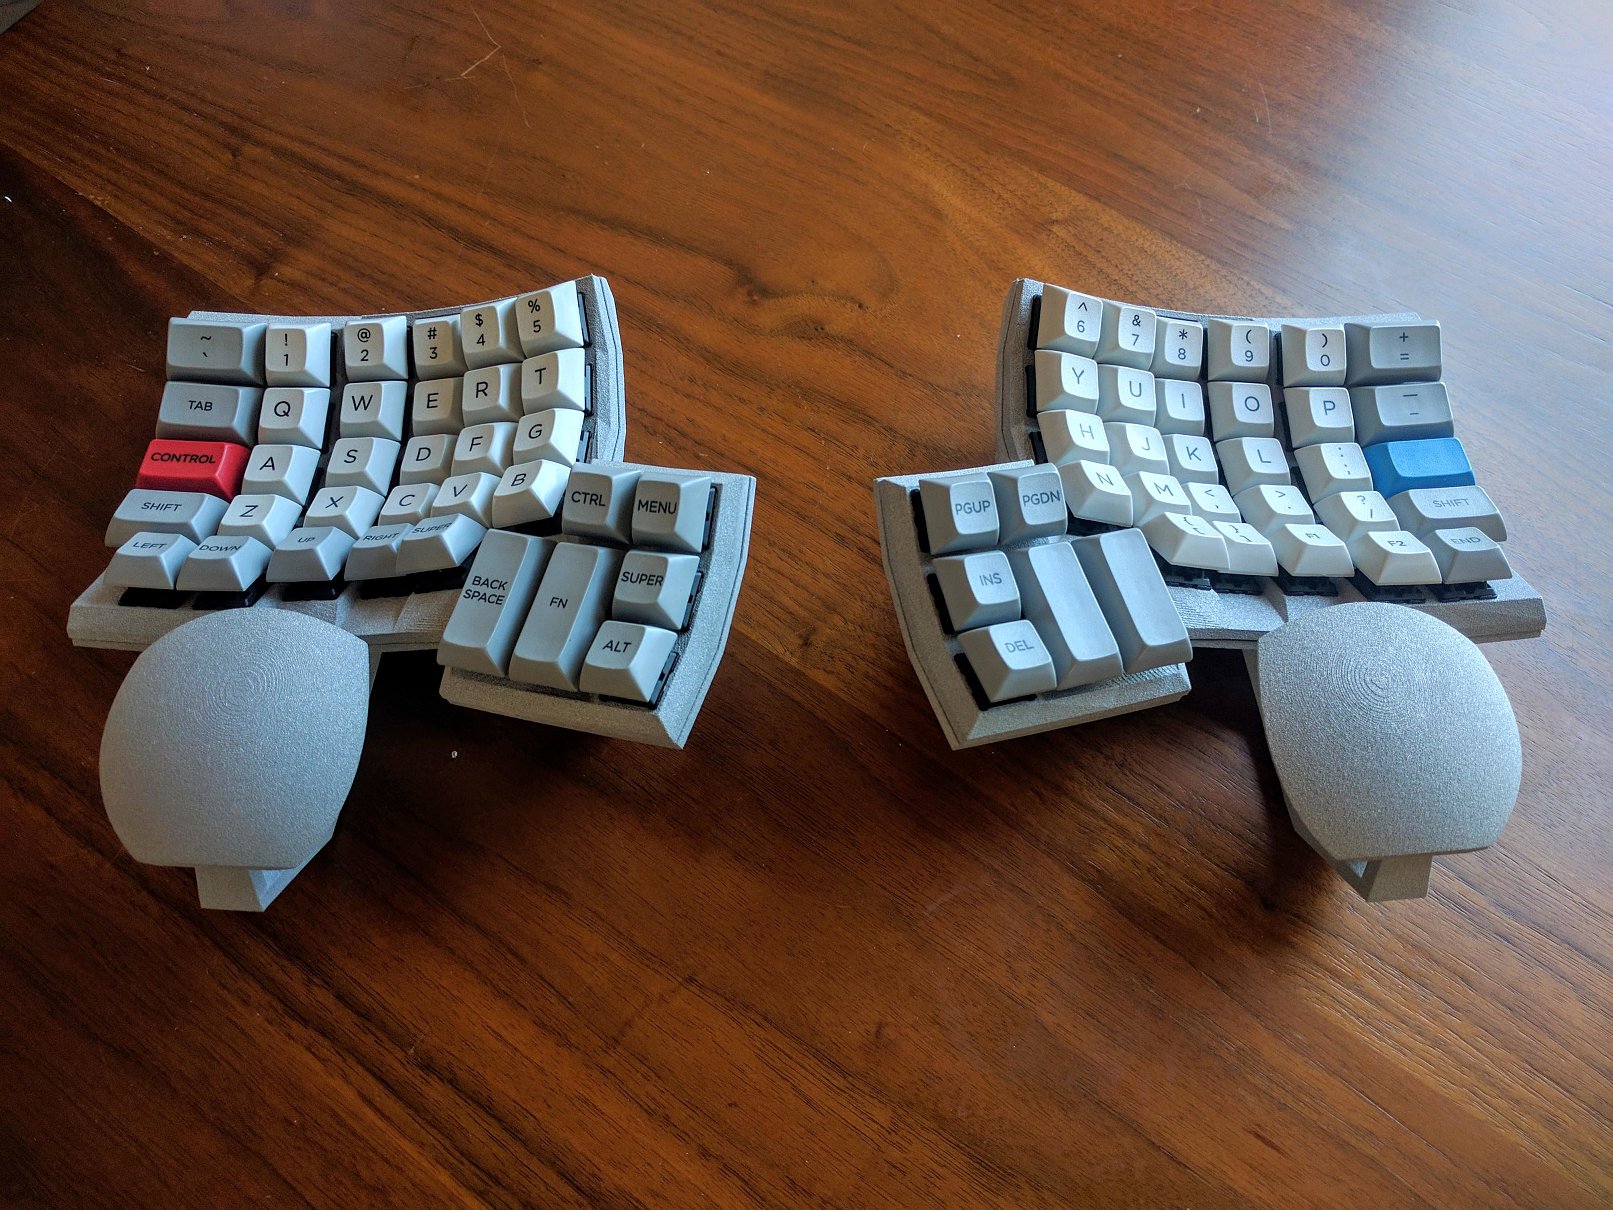 Keyboard pieces for two crossword clue